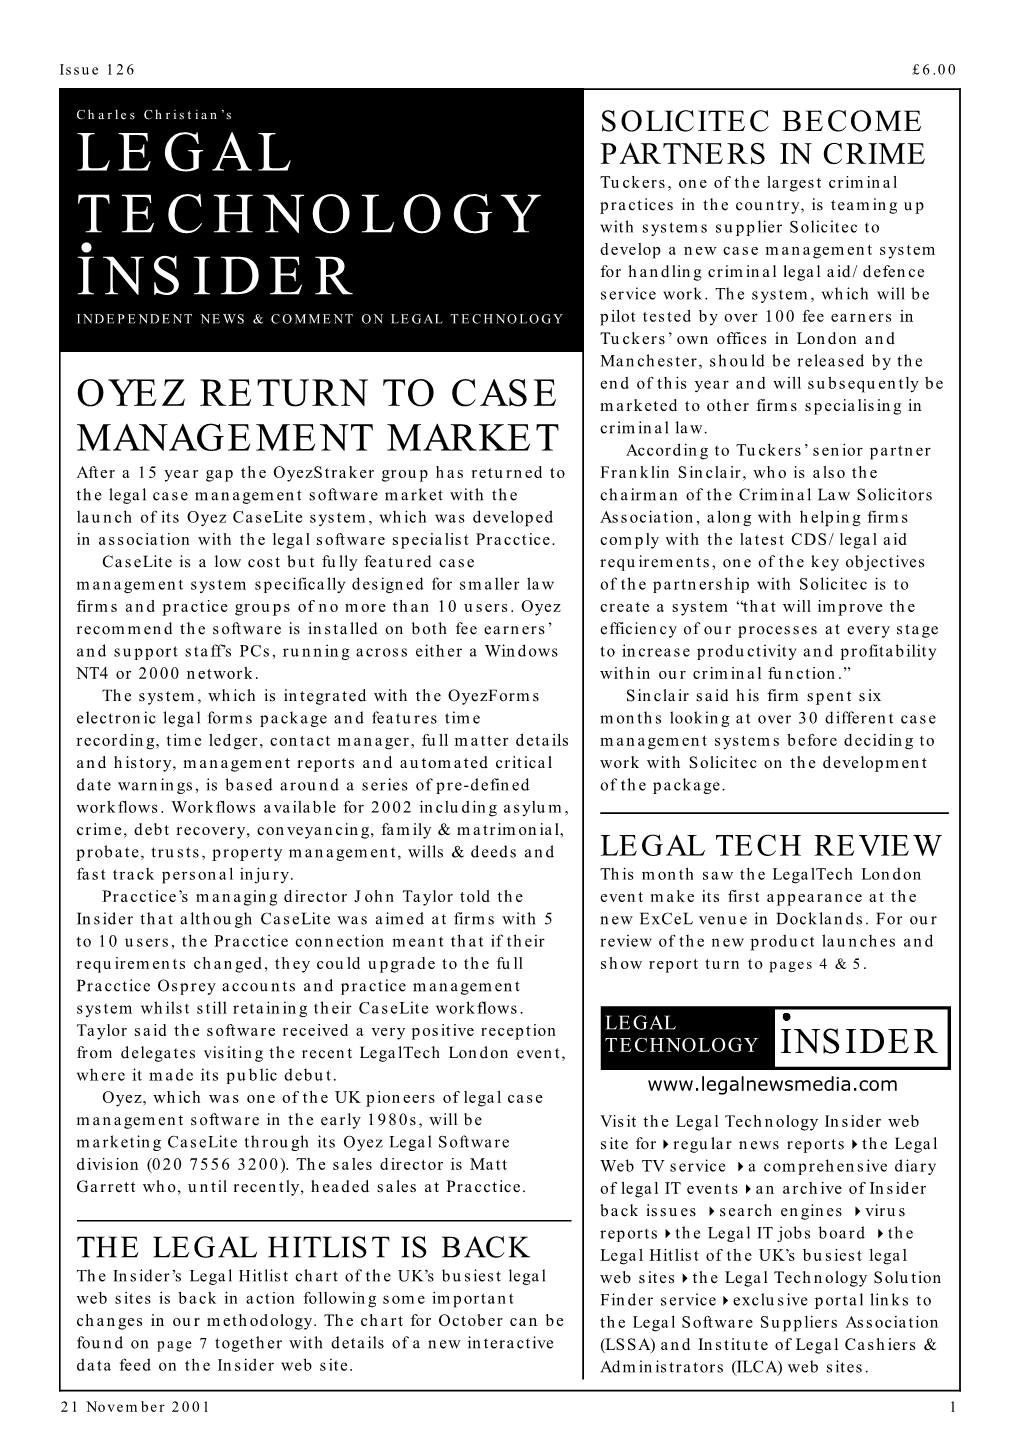 Legal Technology Insider Web Marketing Caselite Through Its Oyez Legal Software Site For4regular News Reports4the Legal Division (020 7556 3200)